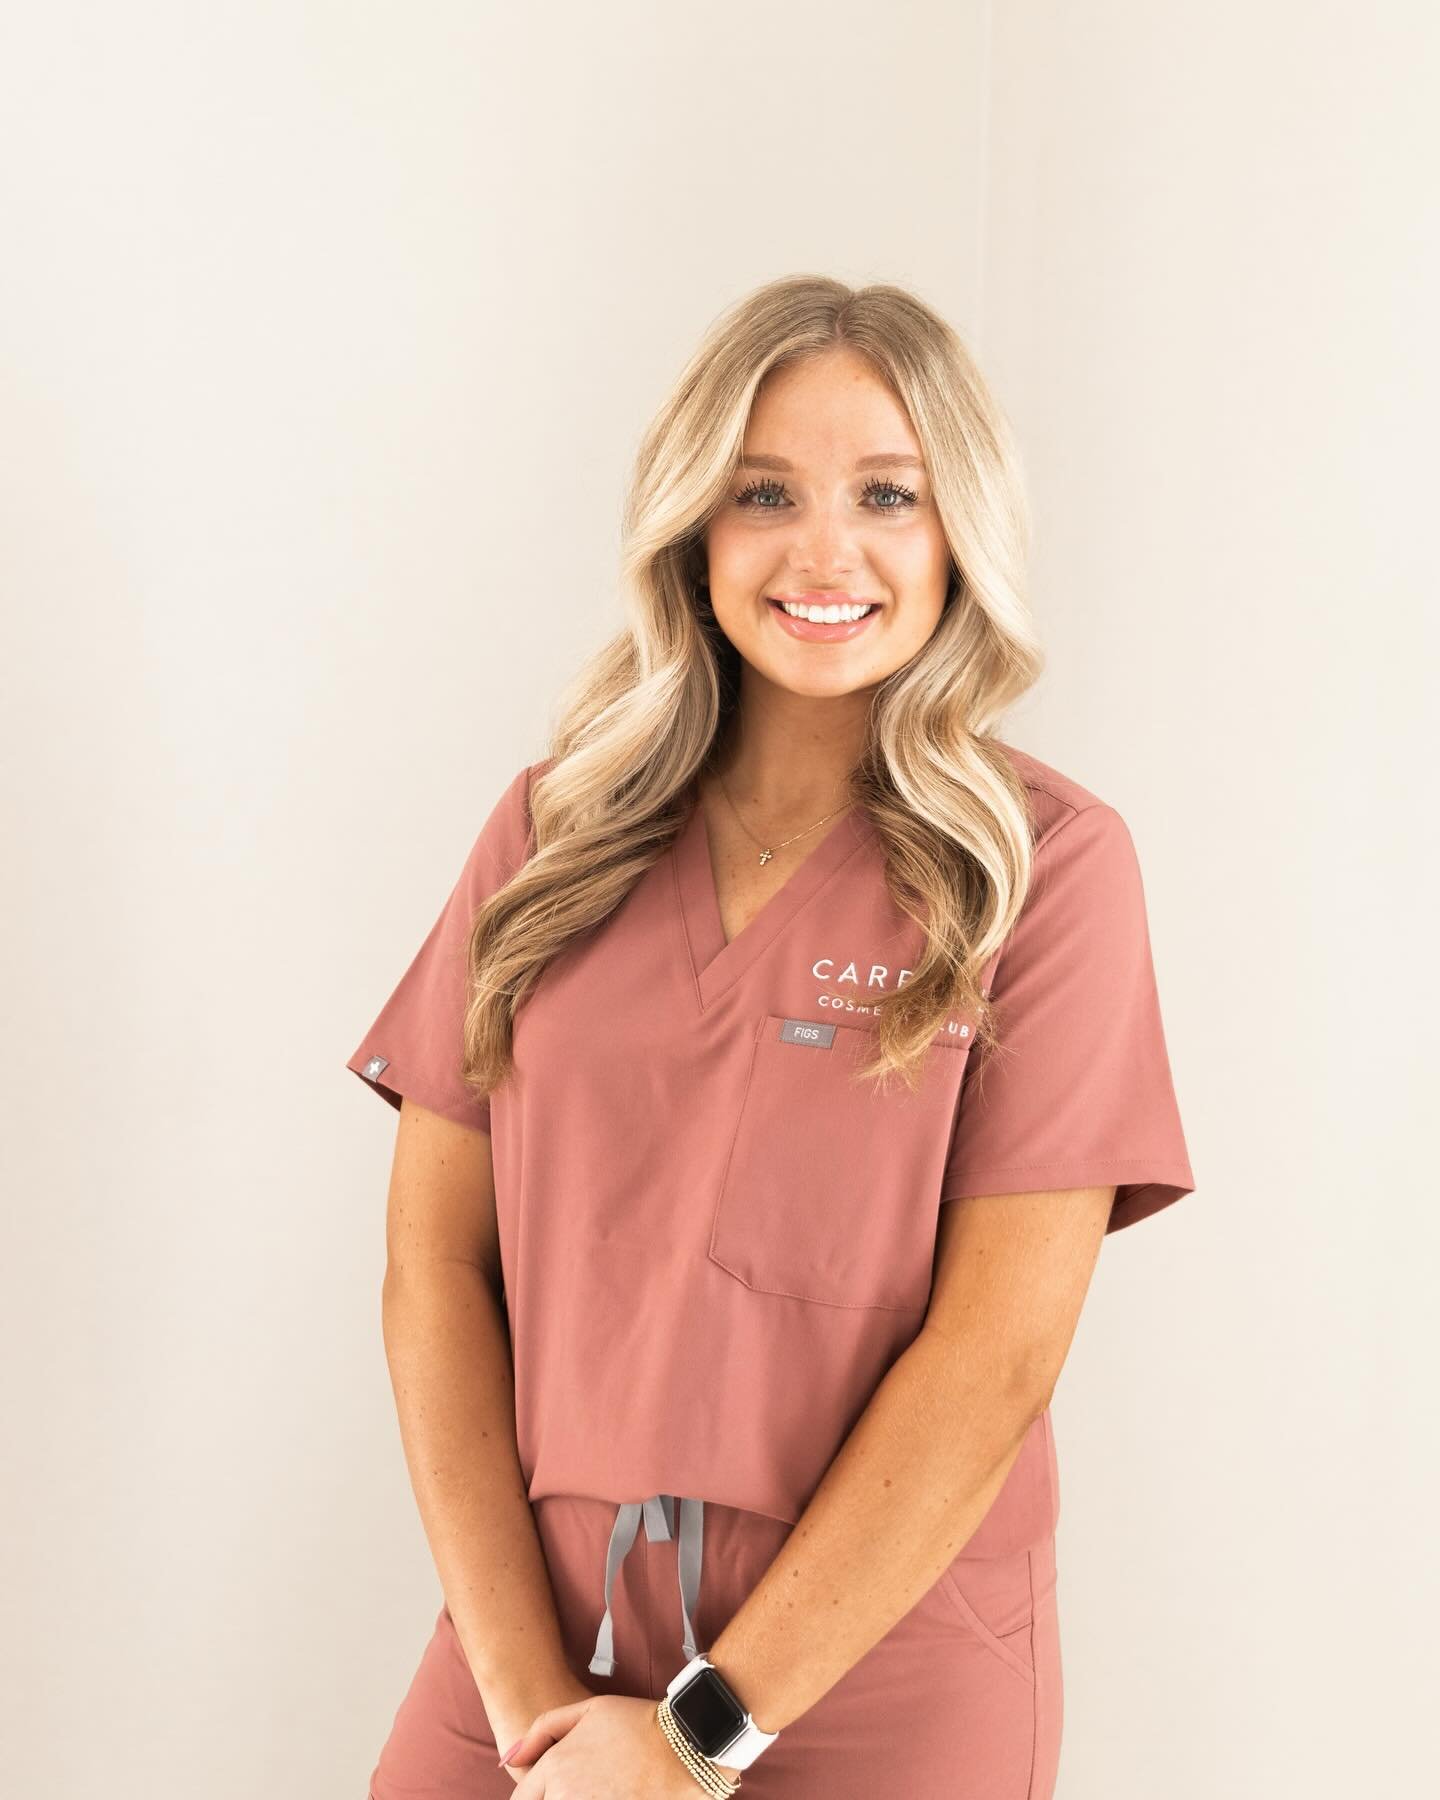 Meet Katy, our dedicated Cosmetic Coordinator, ready to assist you with all your appointments and skincare needs!

With a friendly and efficient approach, Katy ensures a seamless experience from start to finish. Whether you&rsquo;re scheduling a cons